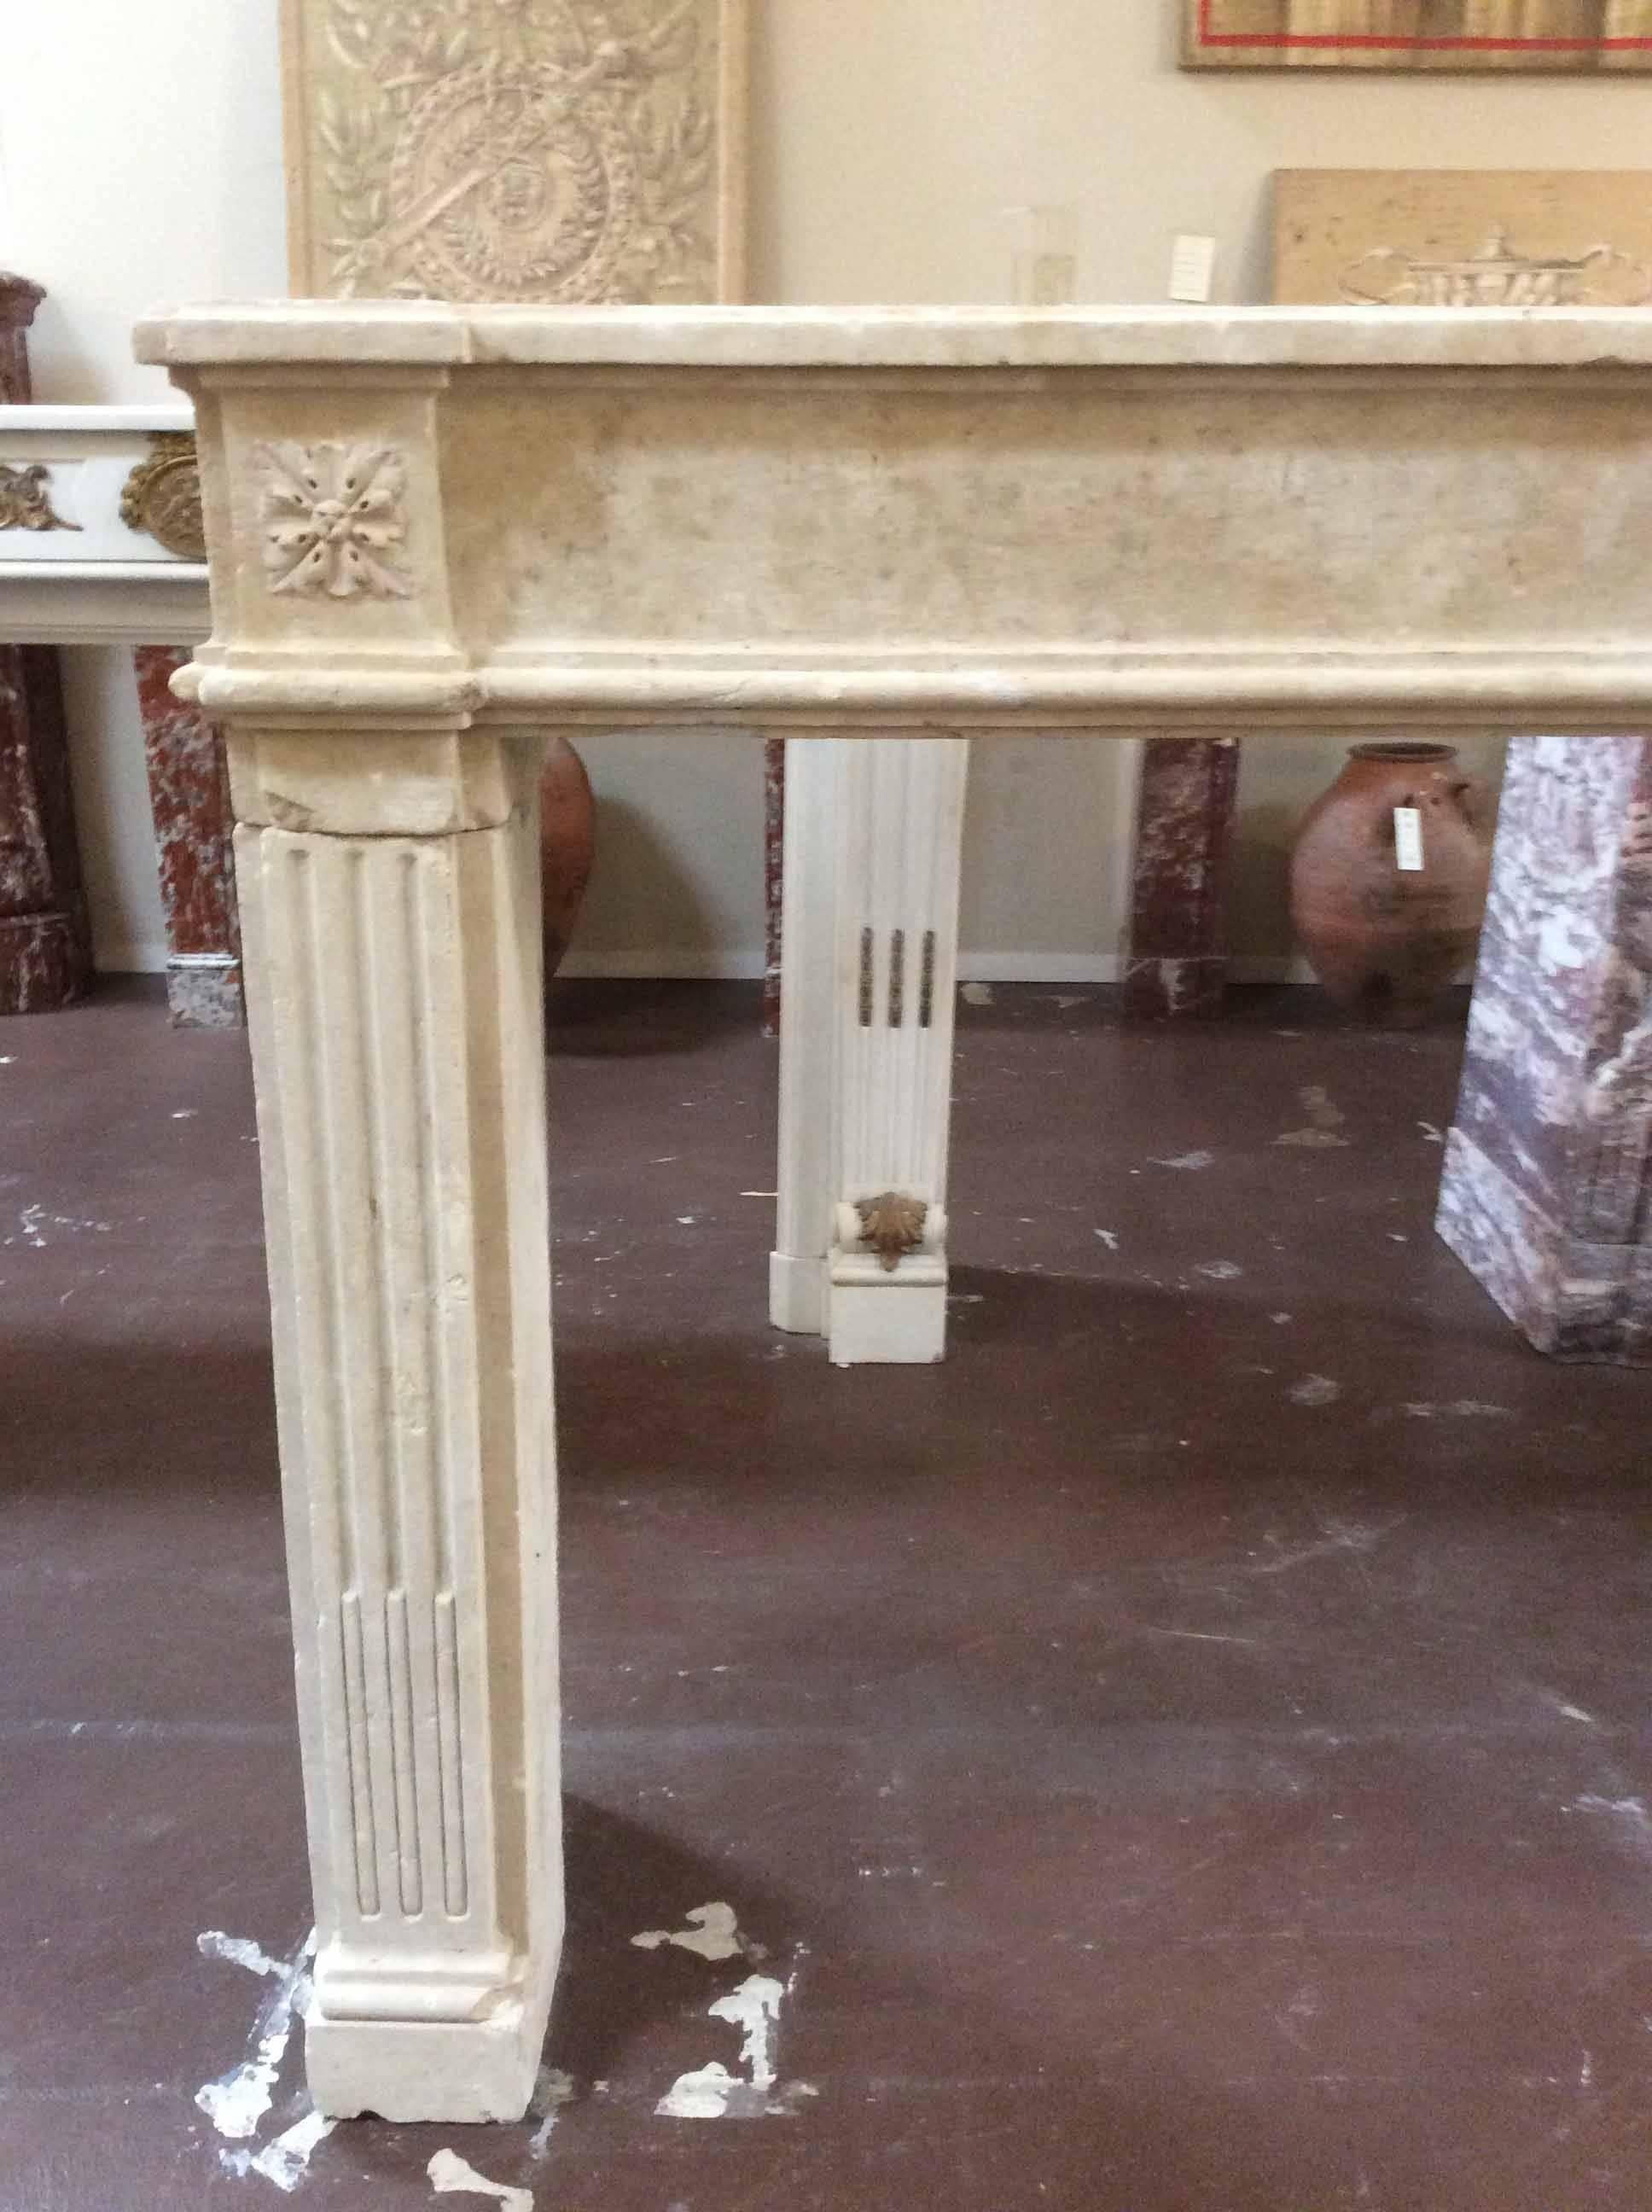 For a classic, beautiful mantle, look no further than this limestone mantle from France circa 1750. The mantle is simple in shape with discrete, carved details that would make it a lovely addition to living room, dining room or bedroom in any home.